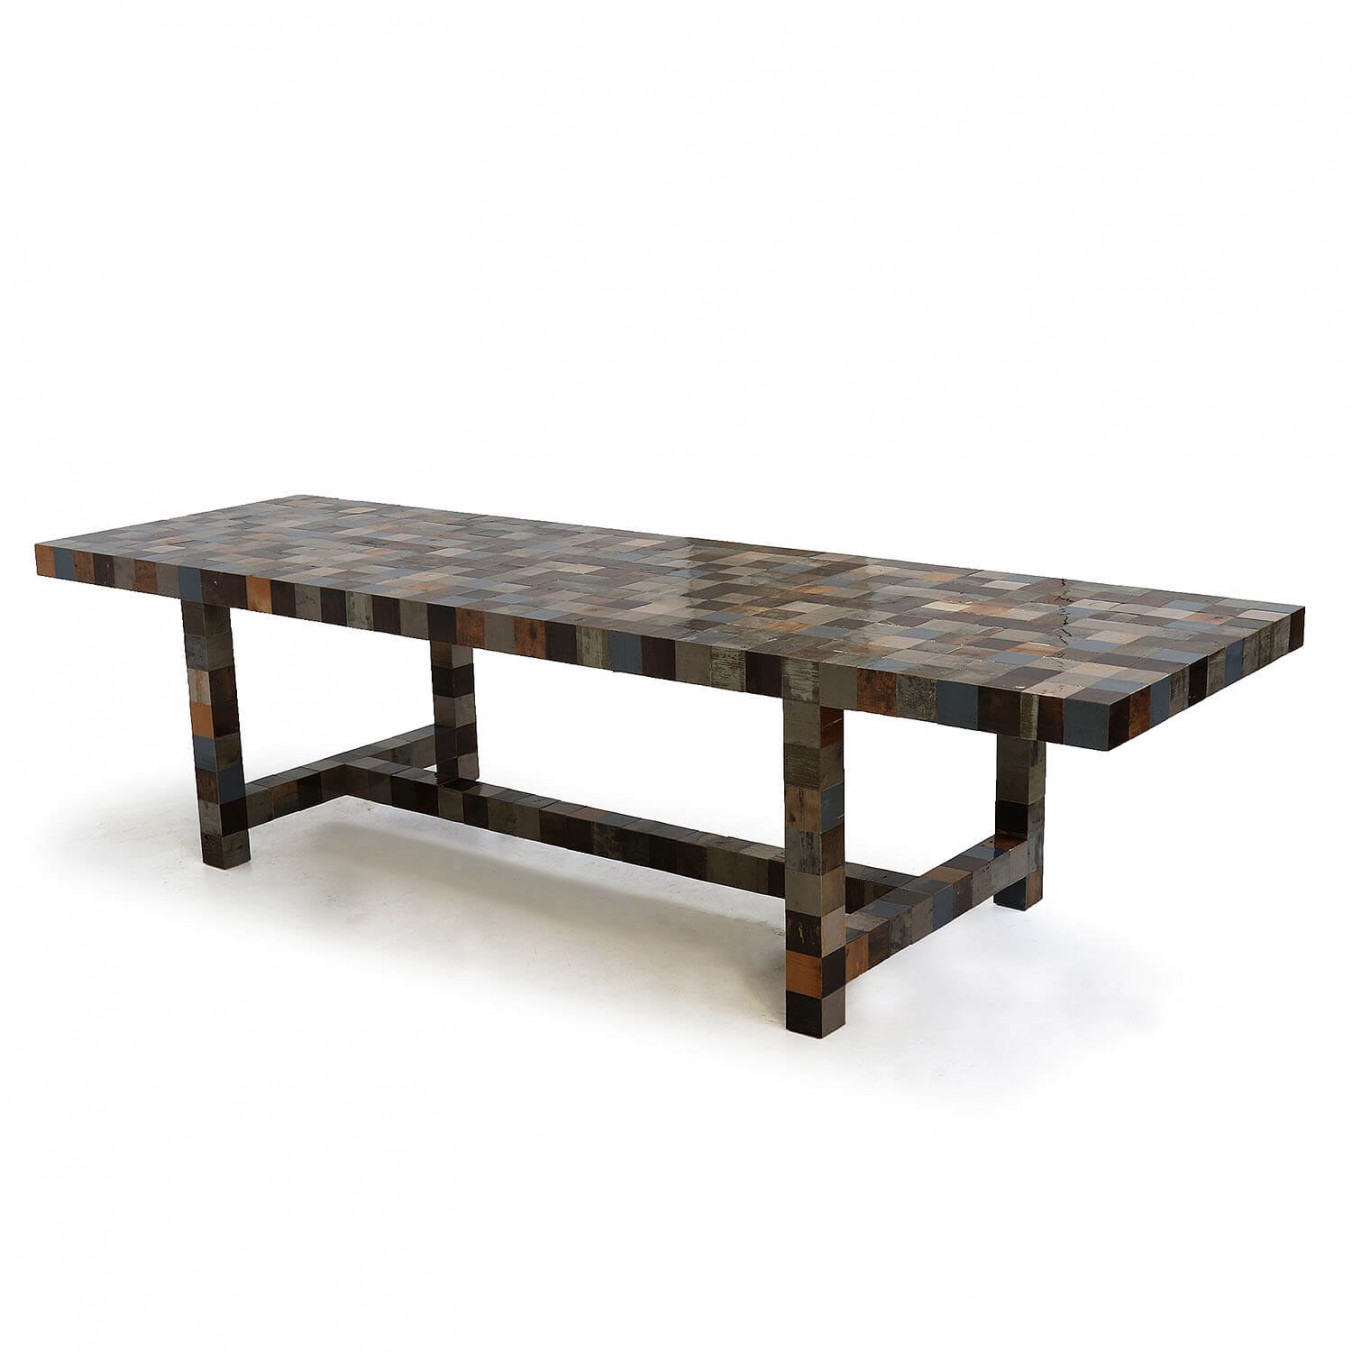 Waste waste 85 x 85 table